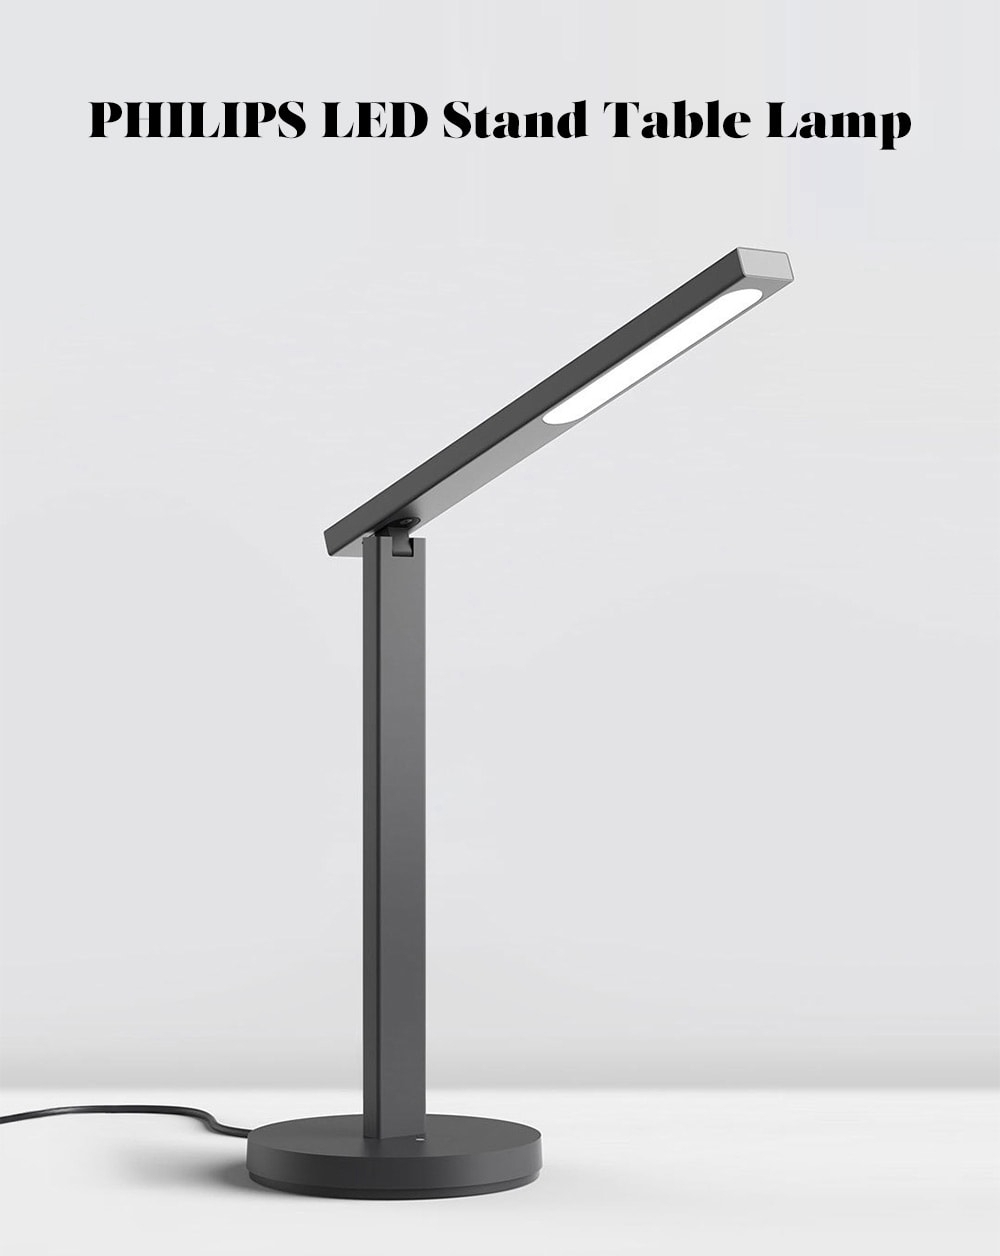 Image result for Zhiyi LED Desk Light Stand Table Lamp Wifi APP Control Dimmable Smart Home For Eye Protection (Xiaomi Ecosystem Product)